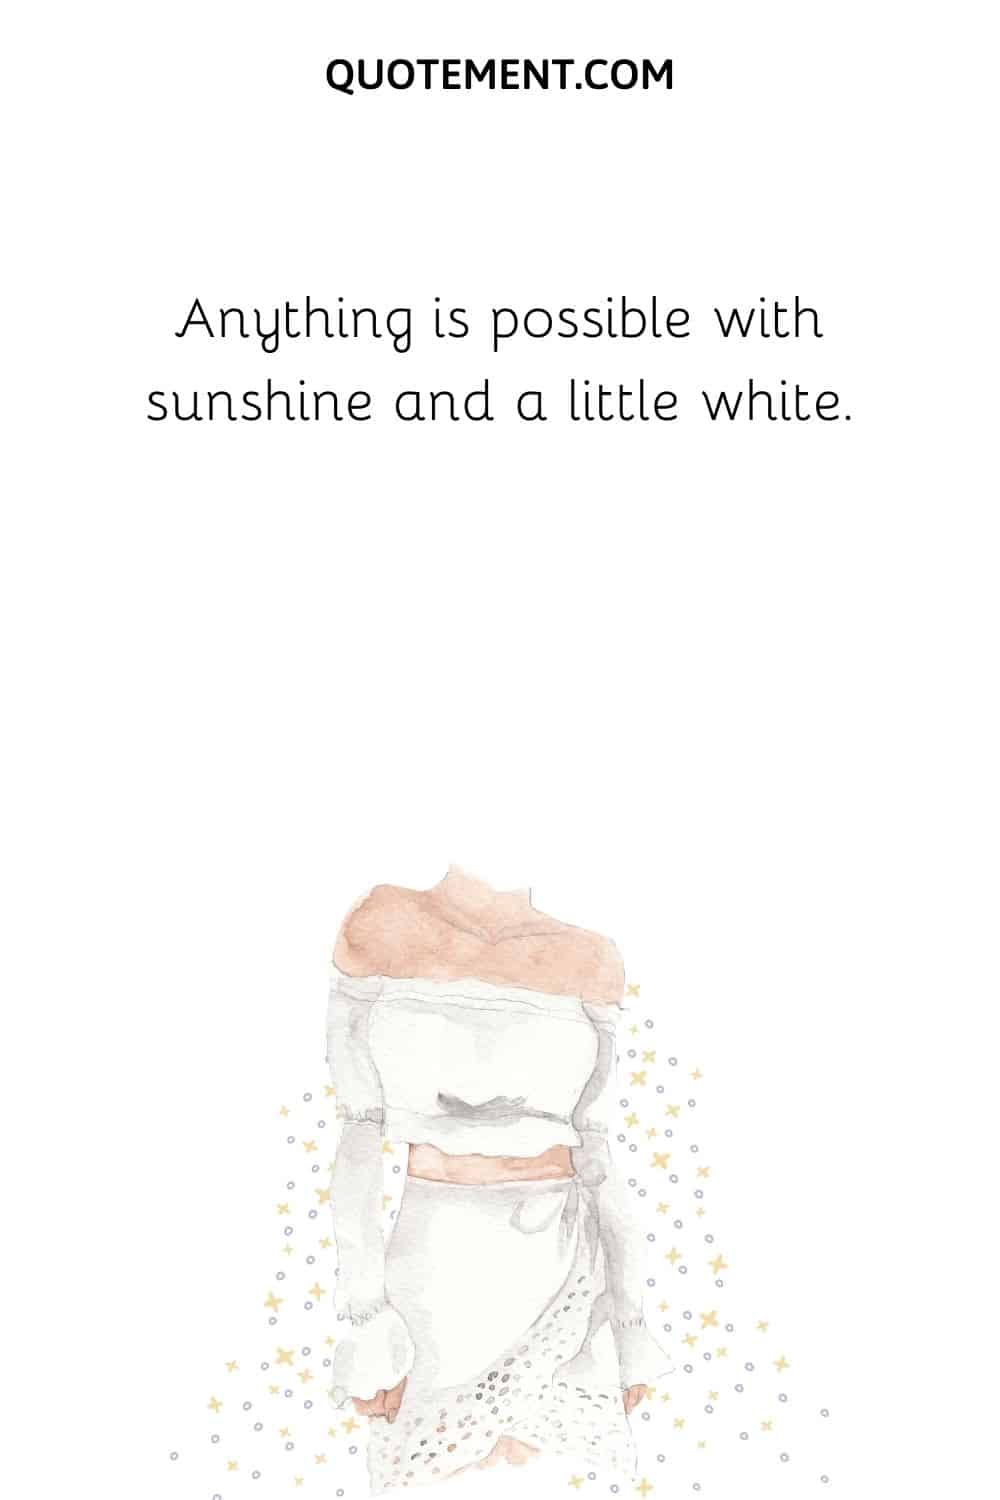 Anything is possible with sunshine and a little white.